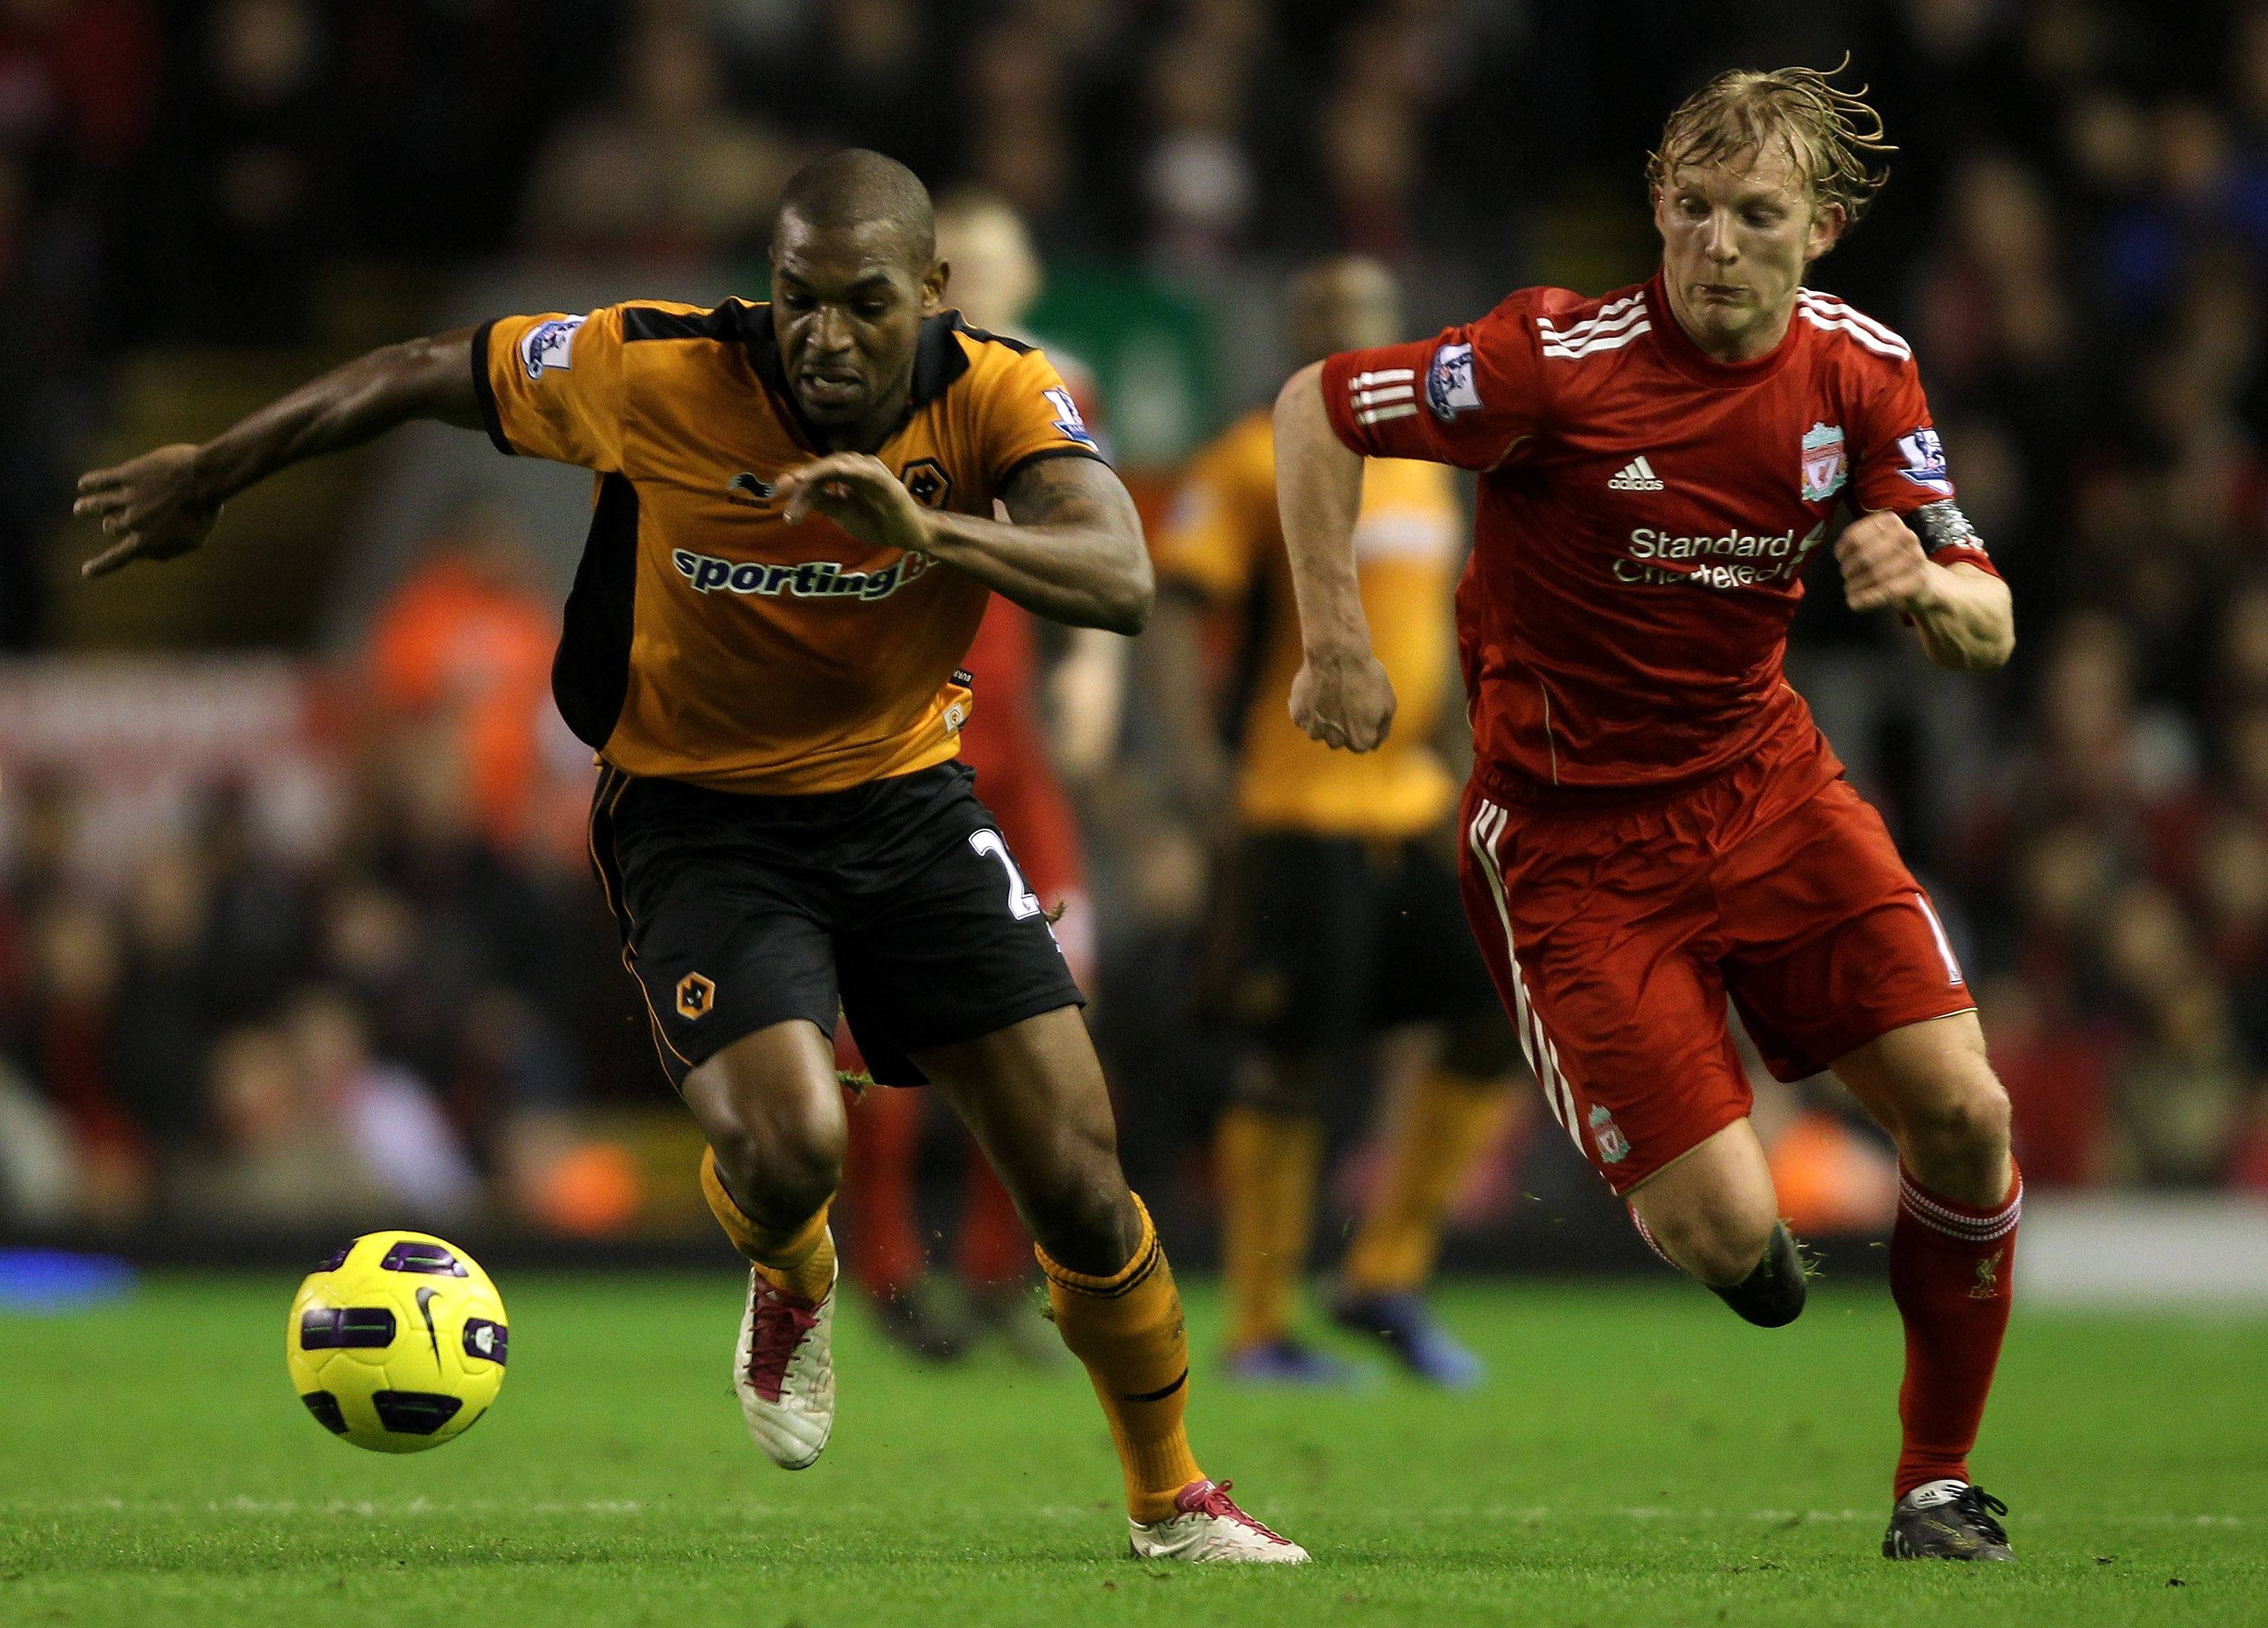 LIVERPOOL, ENGLAND - DECEMBER 29:  Dirk Kuyt of Liverpool competes with Ronald Zubar of Wolverhampton Wanderers during the Barclays Premier League match between Liverpool and Wolverhampton Wanderers at Anfield on December 29, 2010 in Liverpool, England.